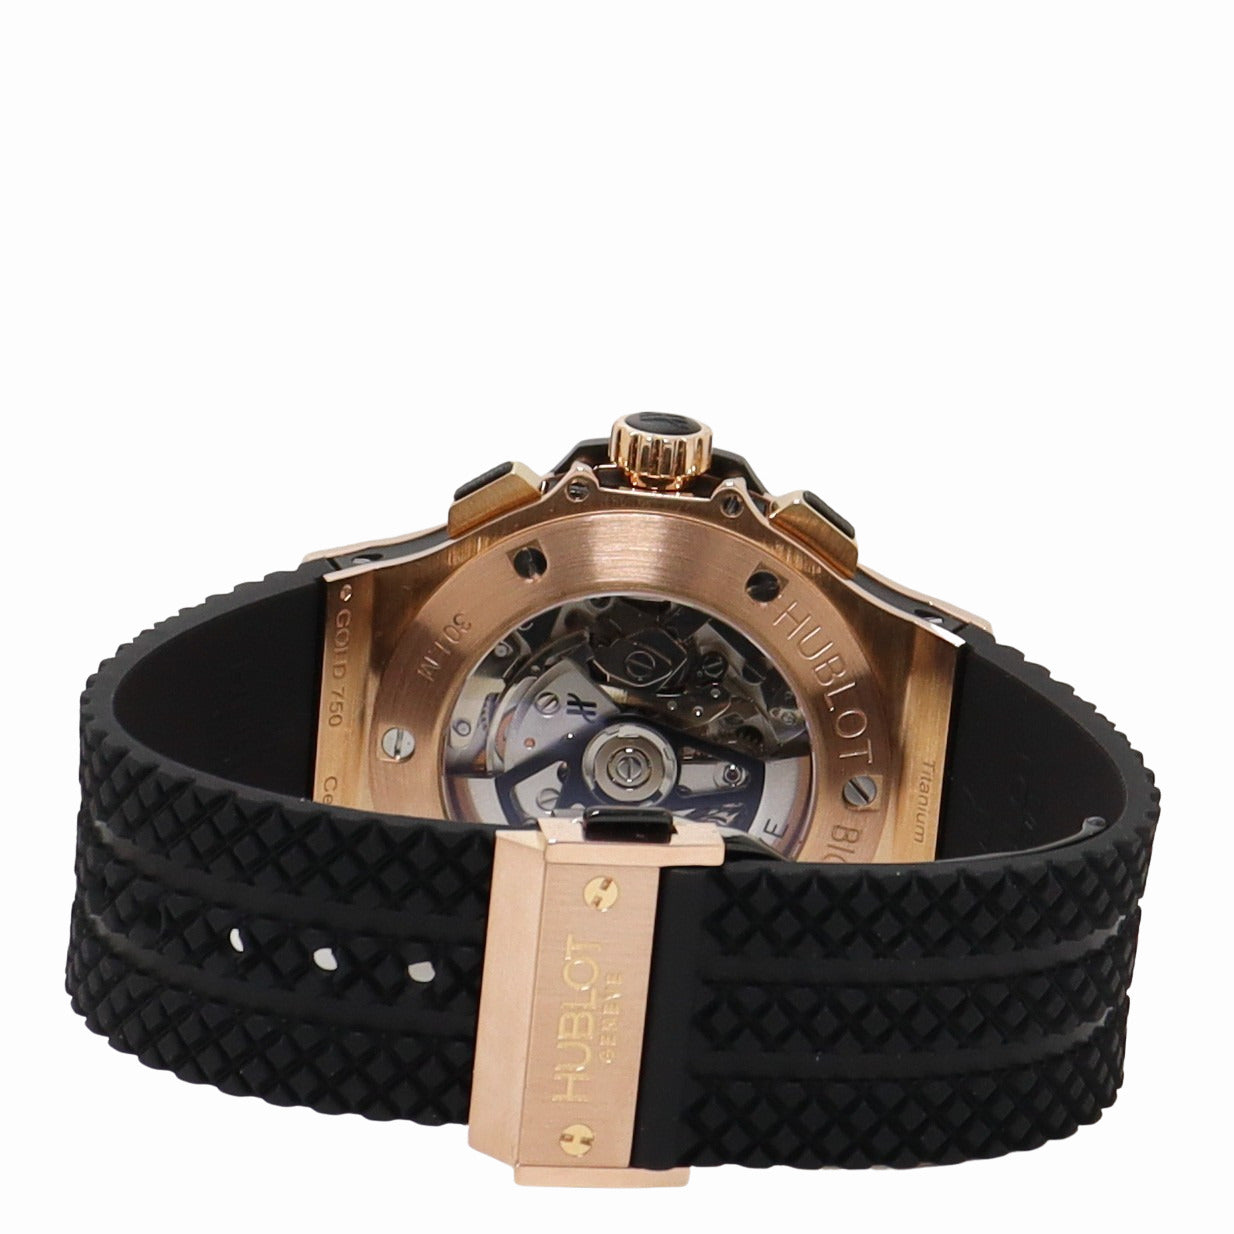 Load image into Gallery viewer, Hublot Big Bang Rose Gold 44mm Black Chronograph Dial Watch Reference#: 301.PB.131.RX - Happy Jewelers Fine Jewelry Lifetime Warranty
